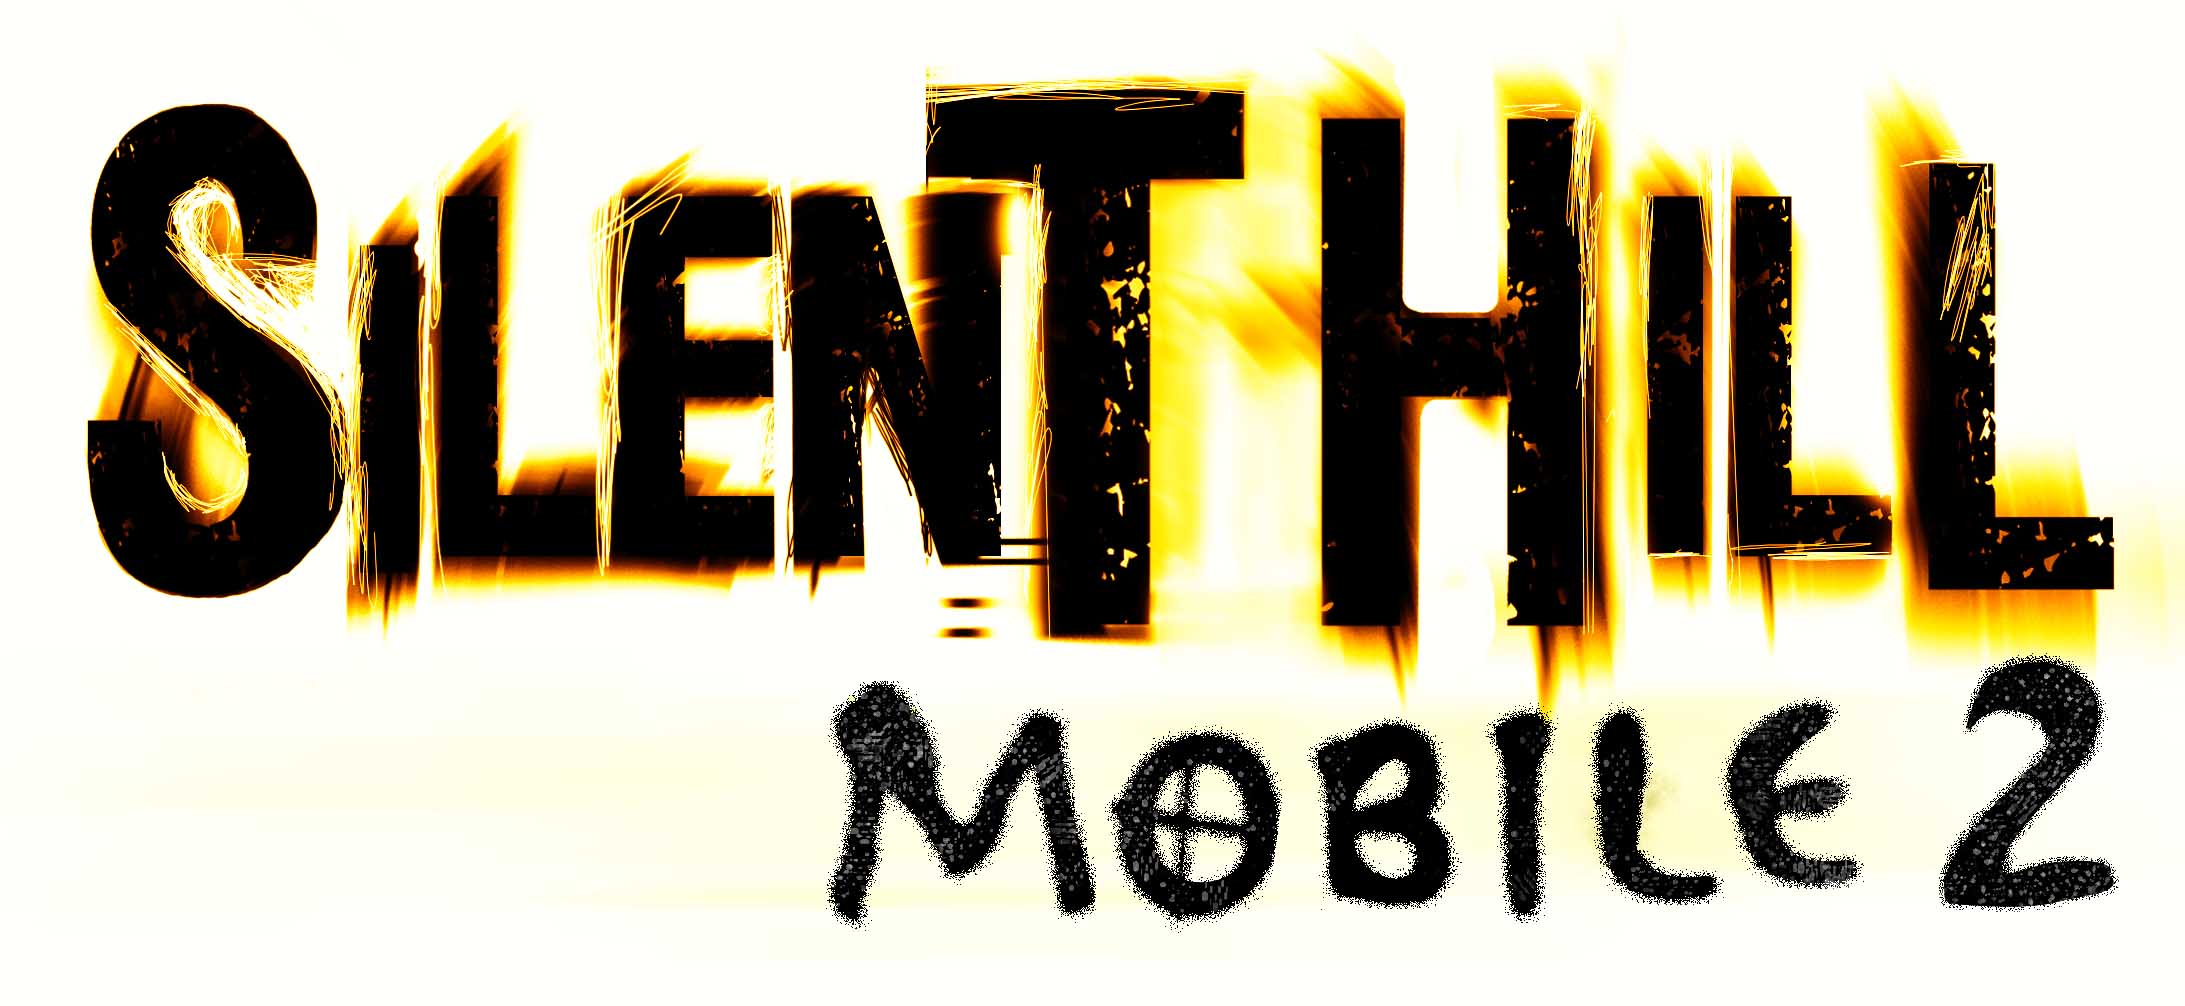 Silent Hill: Mobile 2, Silent Hill Wiki